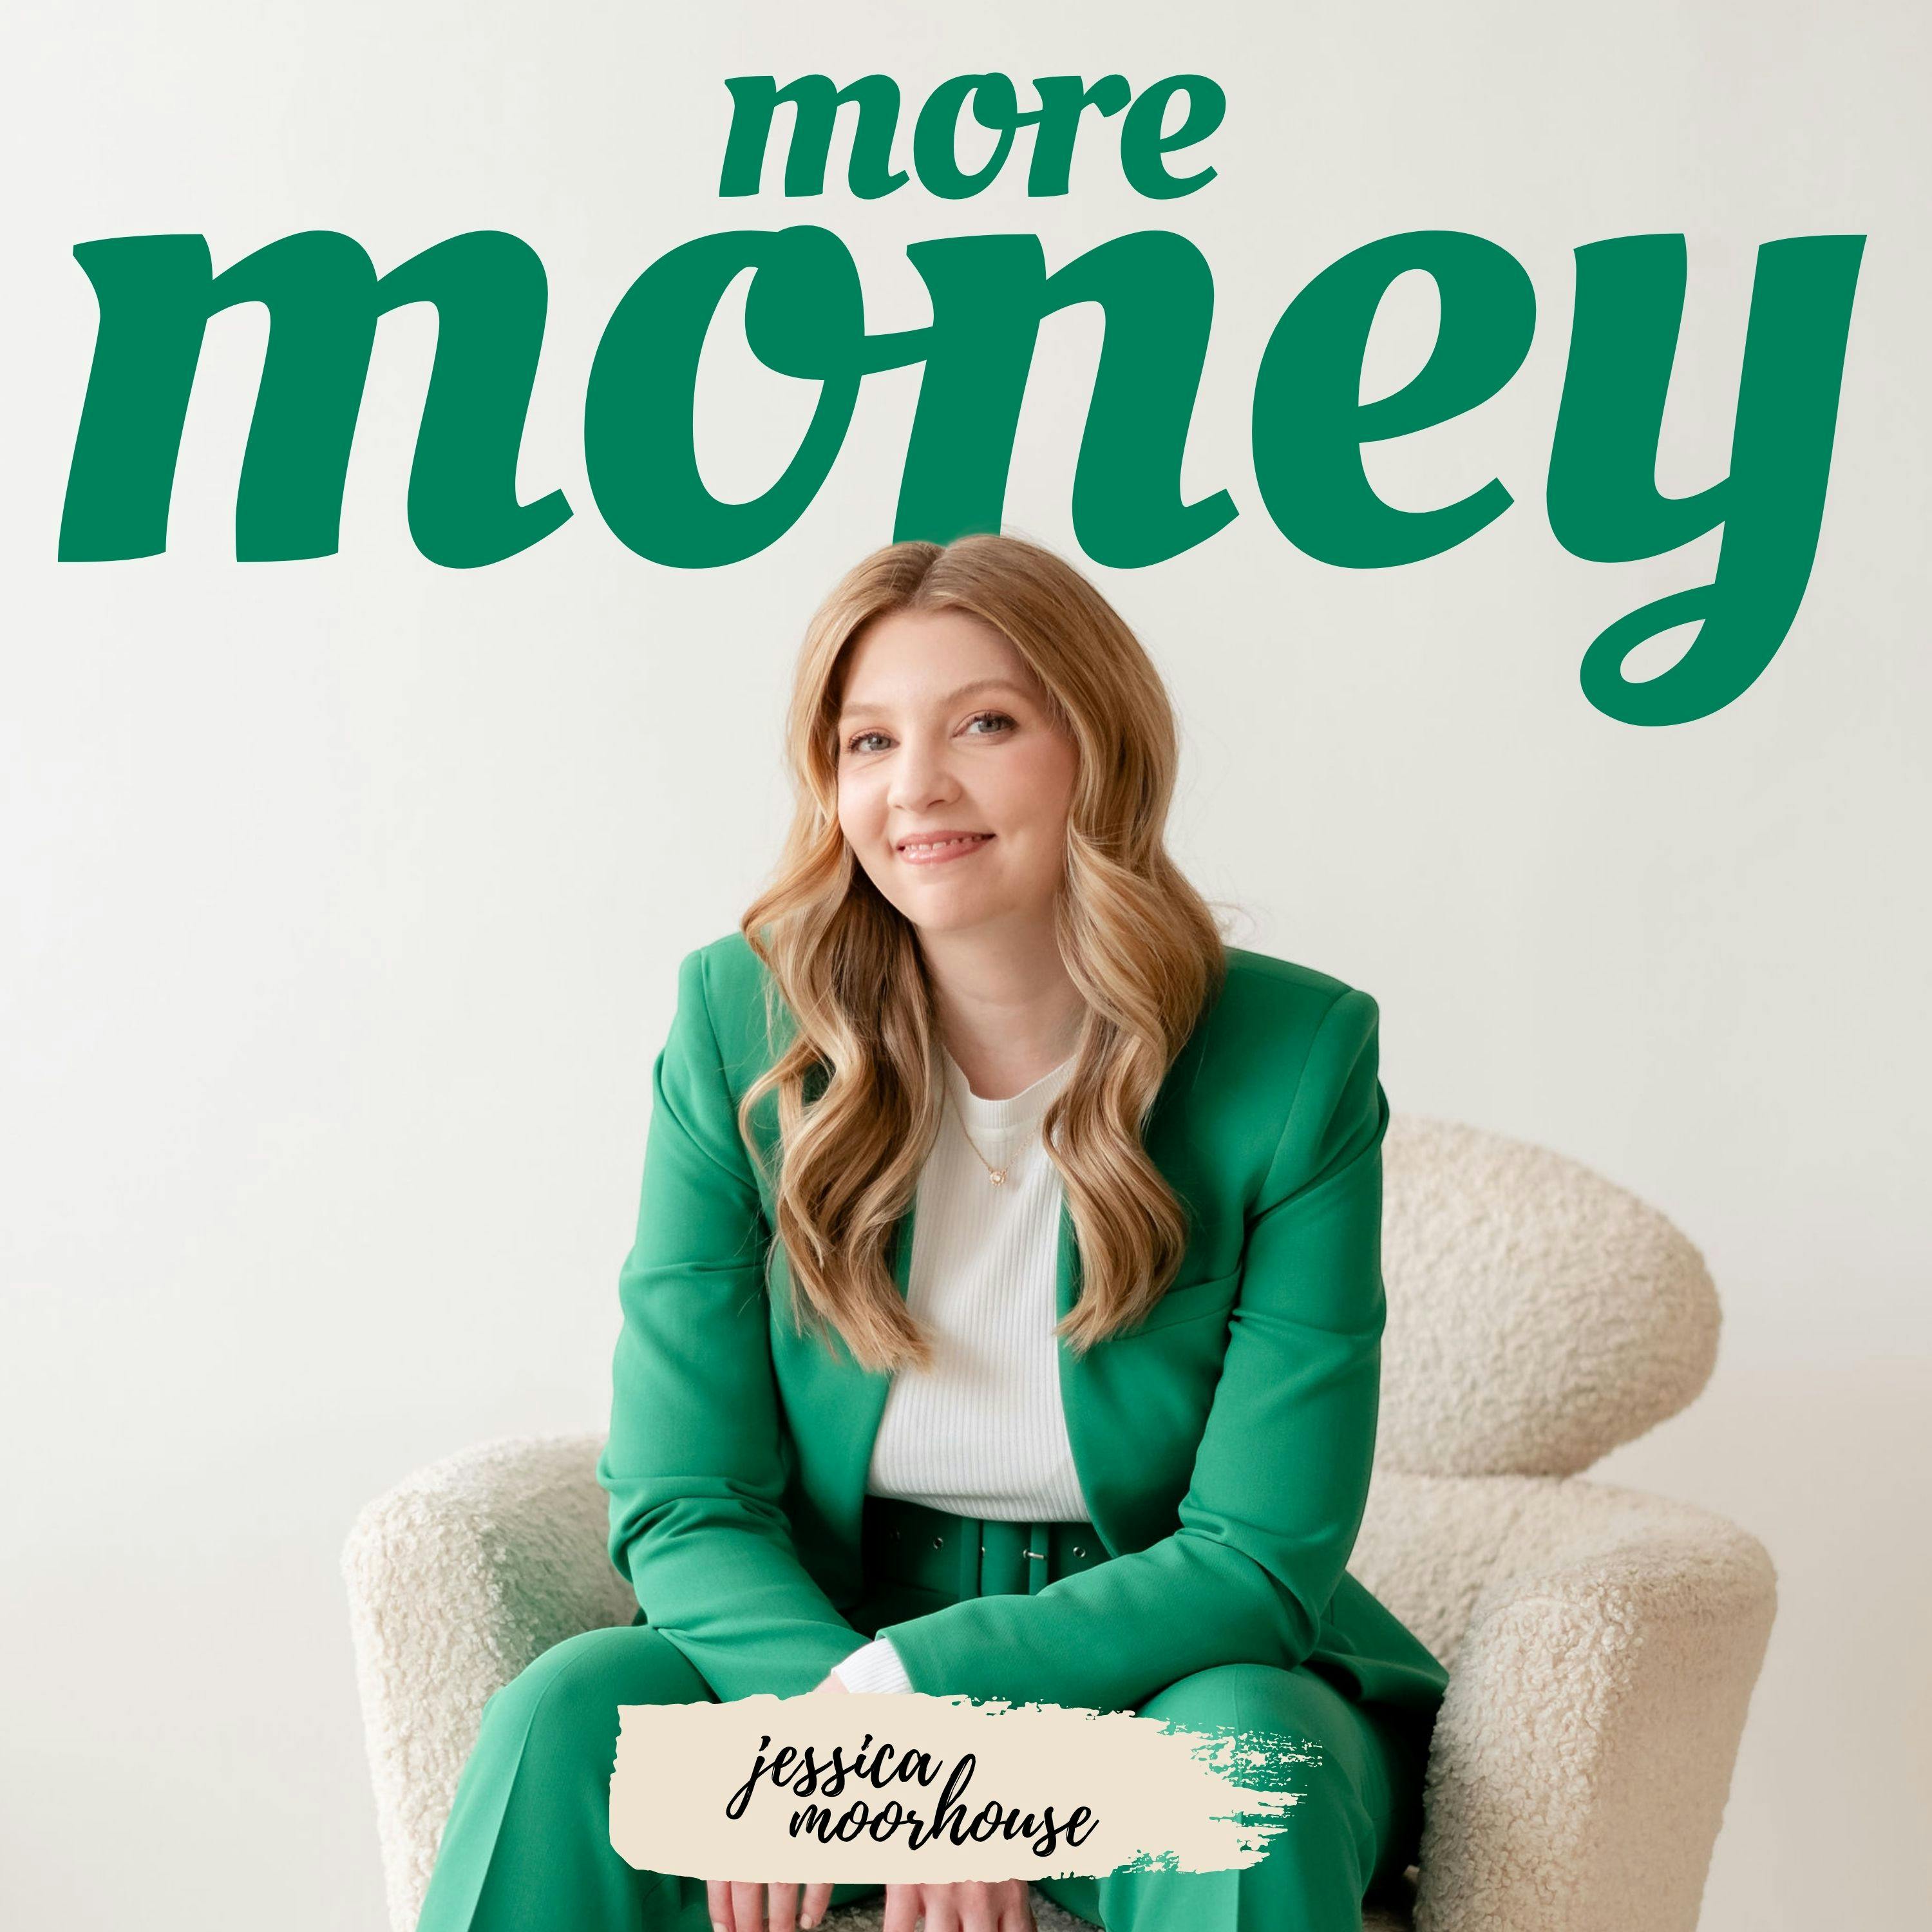 014 Climbing Out of Debt by Living like a Frugalista - Catherine MacLean, Blogger at Plunged in Debt